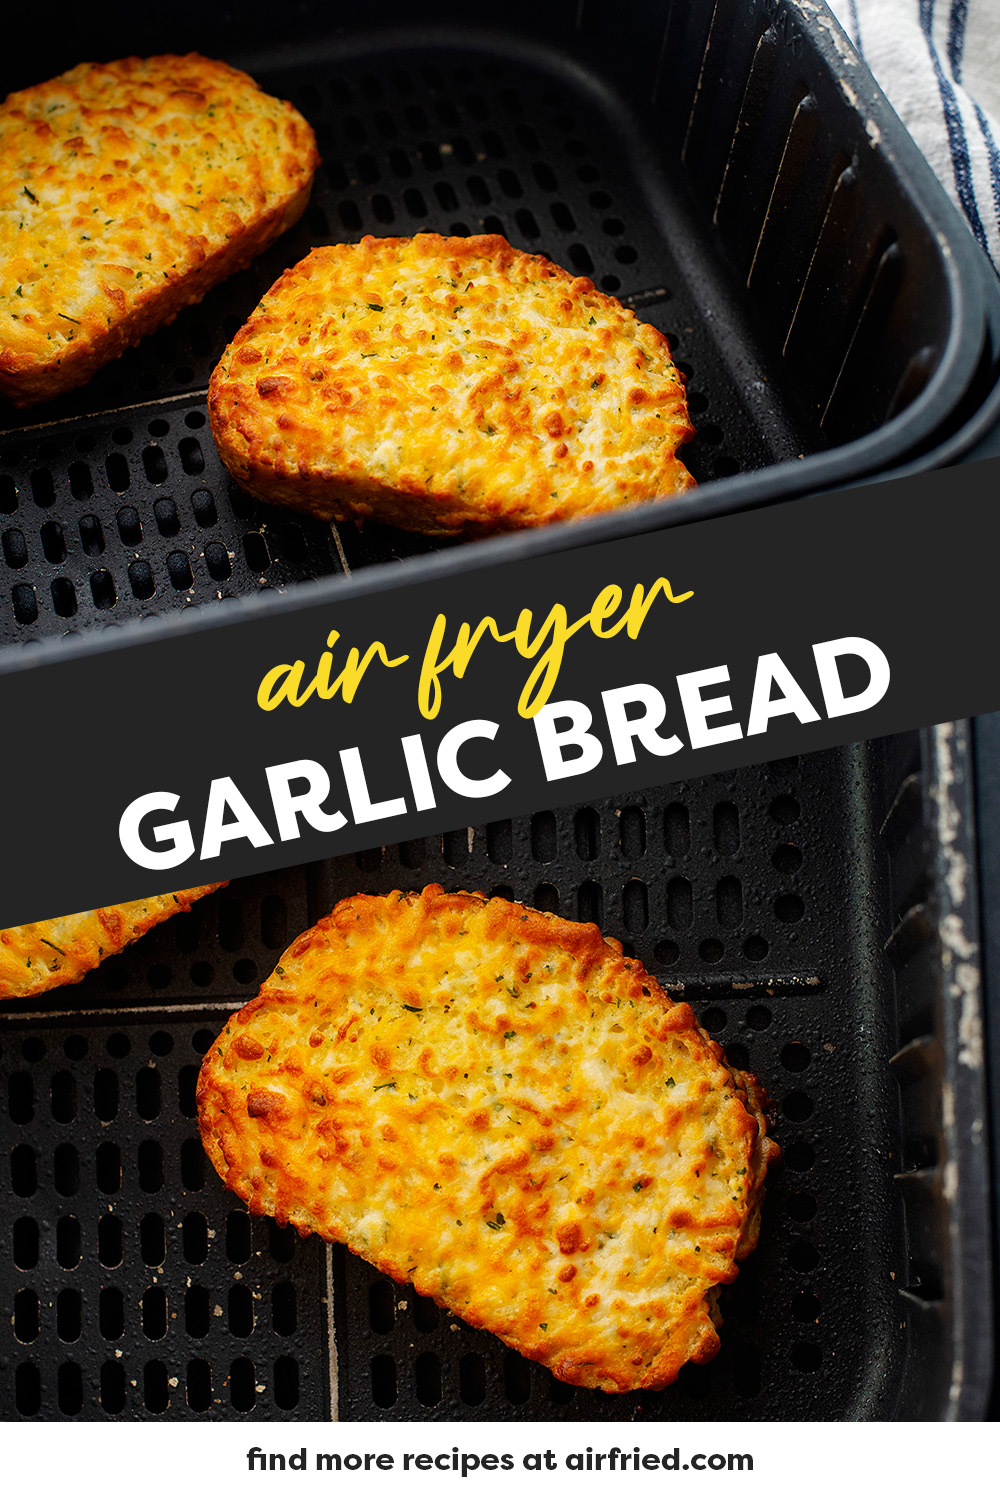 This frozen garlic bread cooks super quick in the air fryer.  You get a great crunch on the crust with a beautifully fluffy center even though it was frozen!